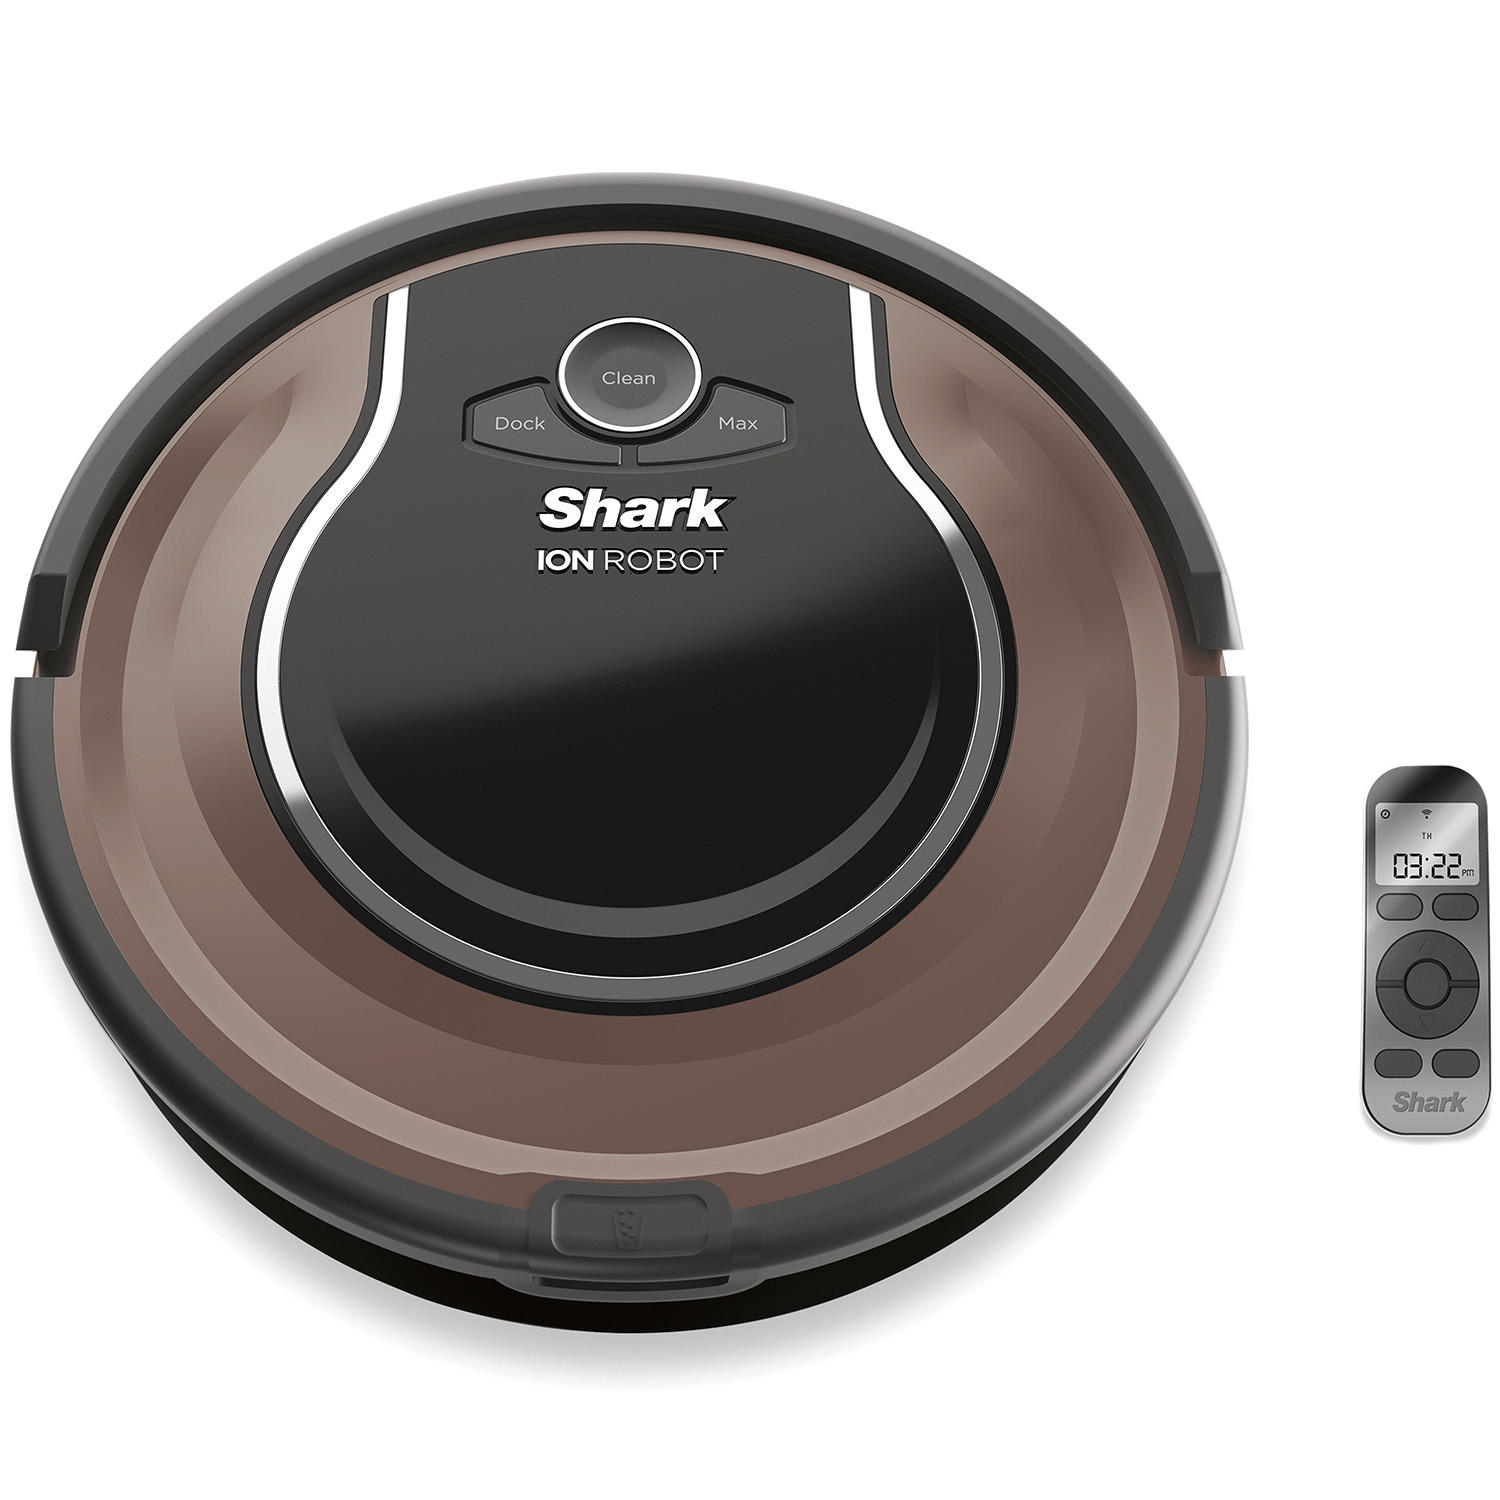 Shark RV725 ION ROBOT Vacuum with Scheduling Remote